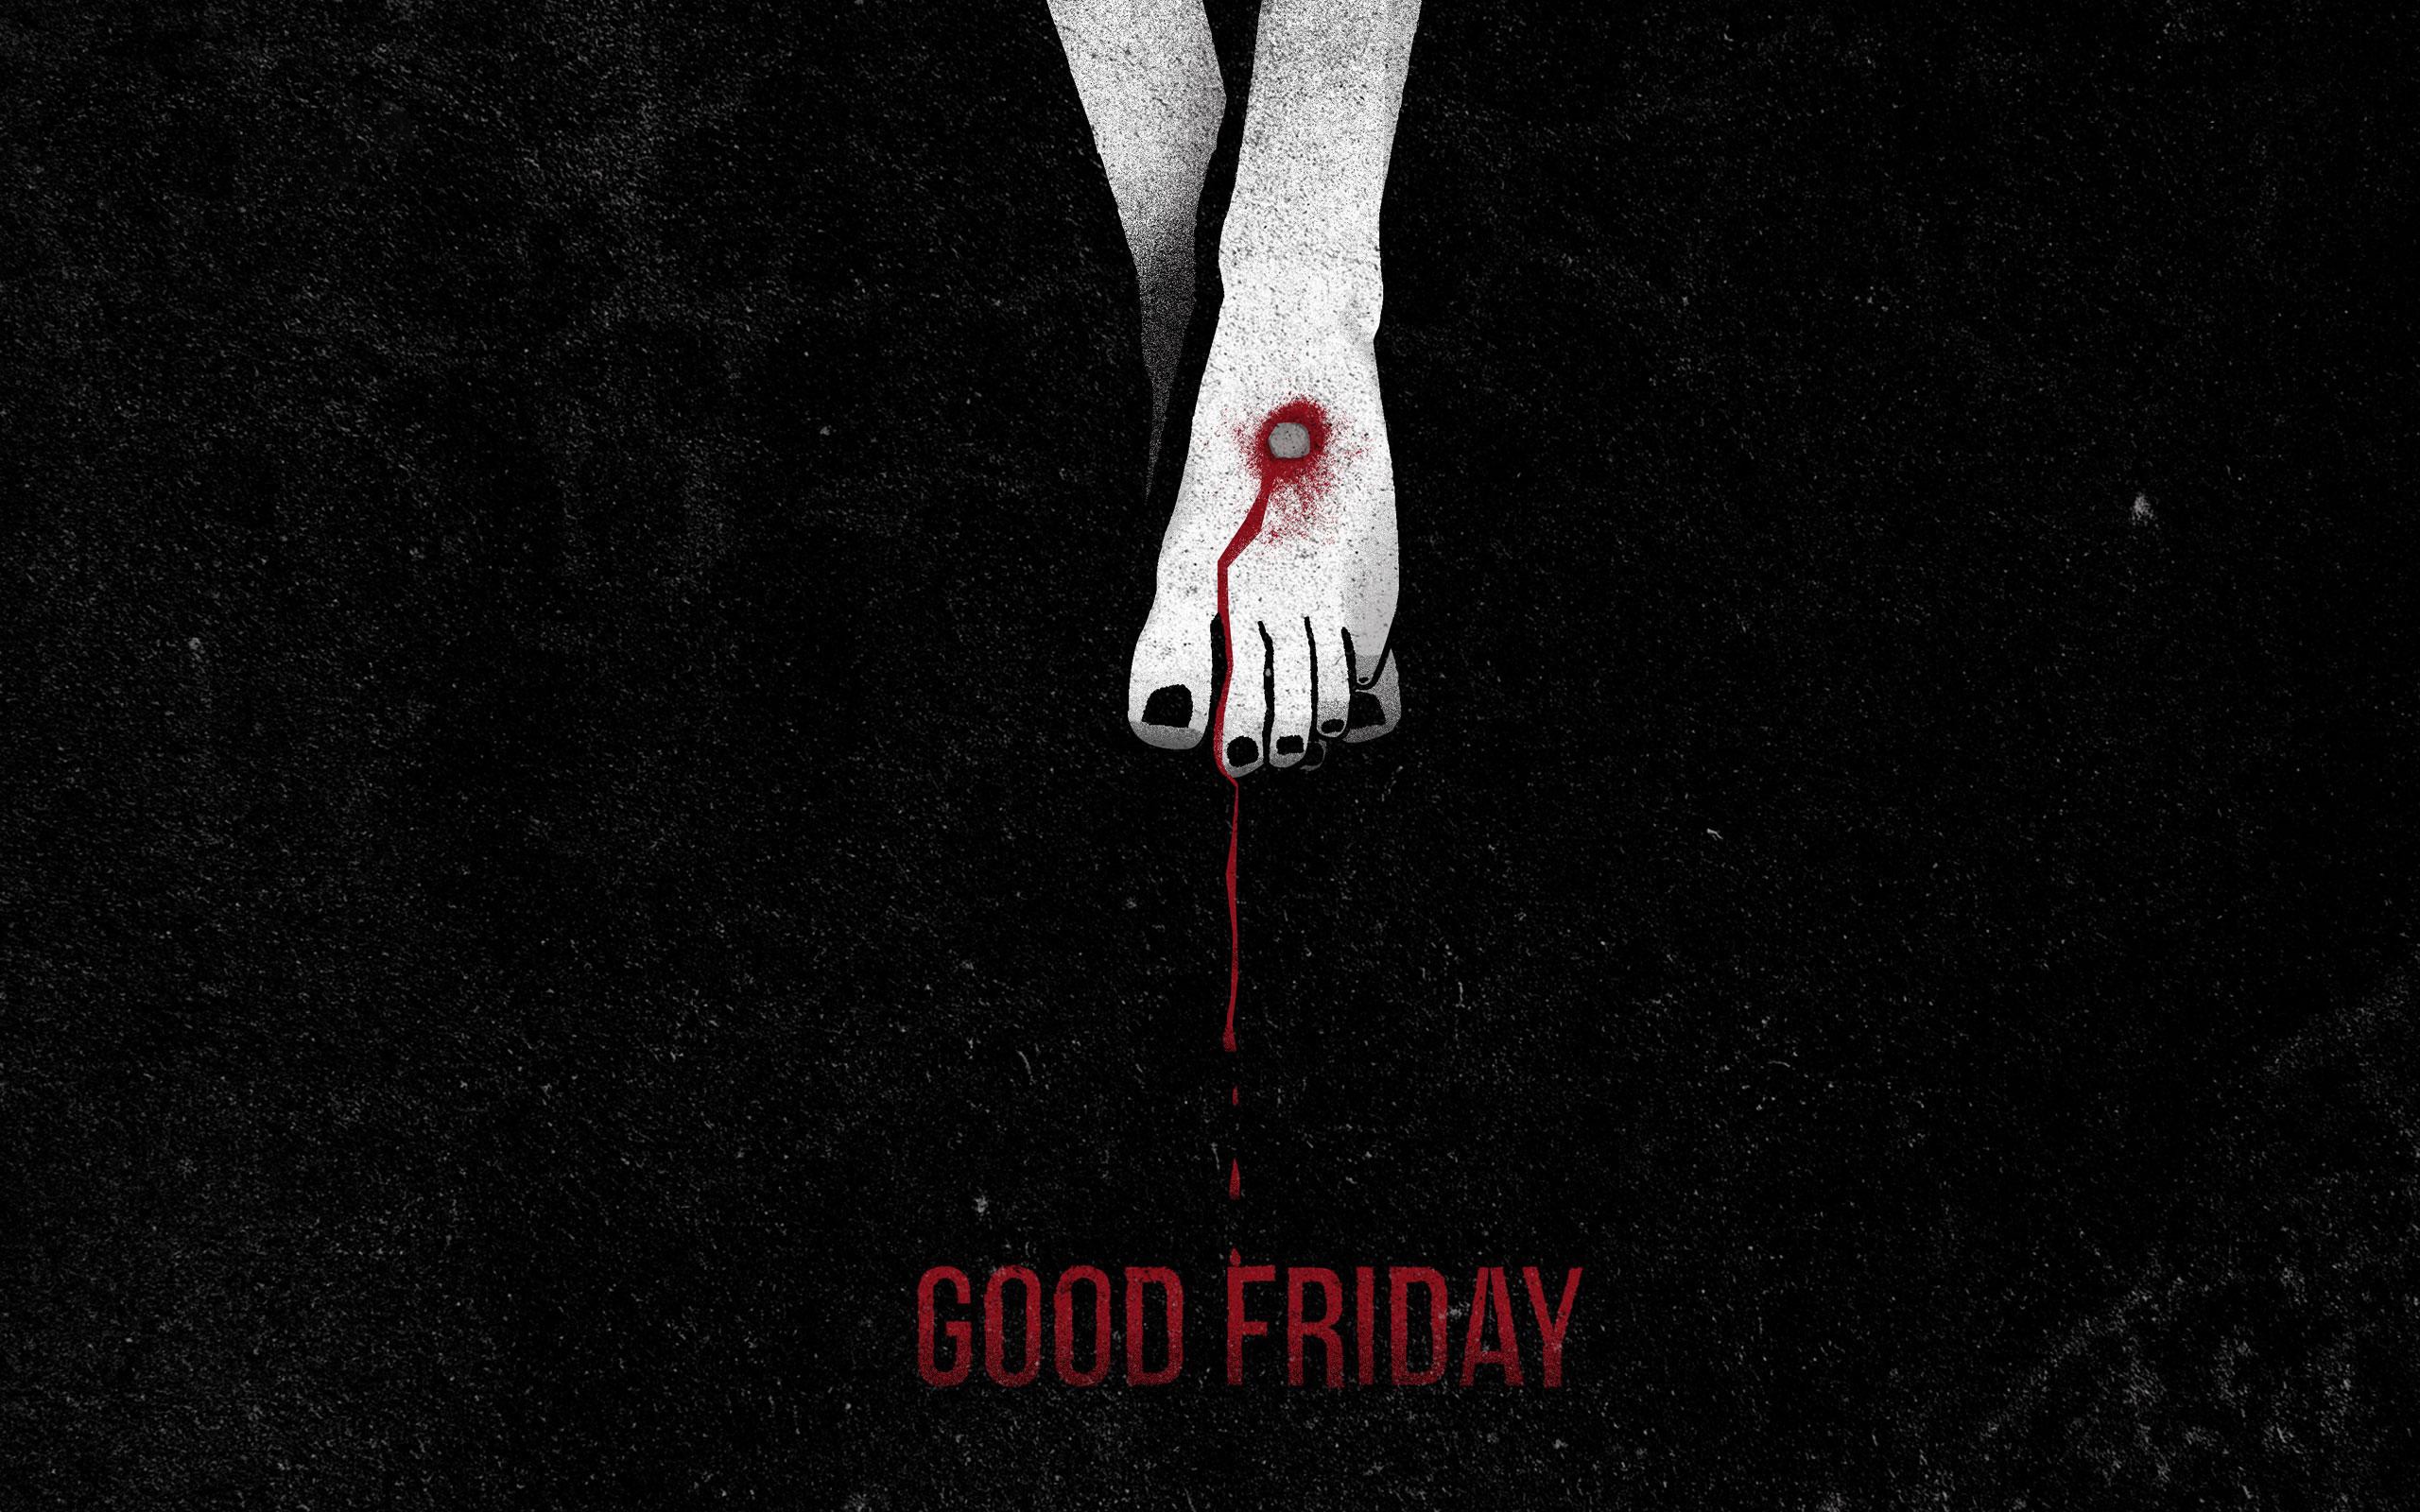 Good Friday HD Wallpapers, Good Friday Wishes, Greeting